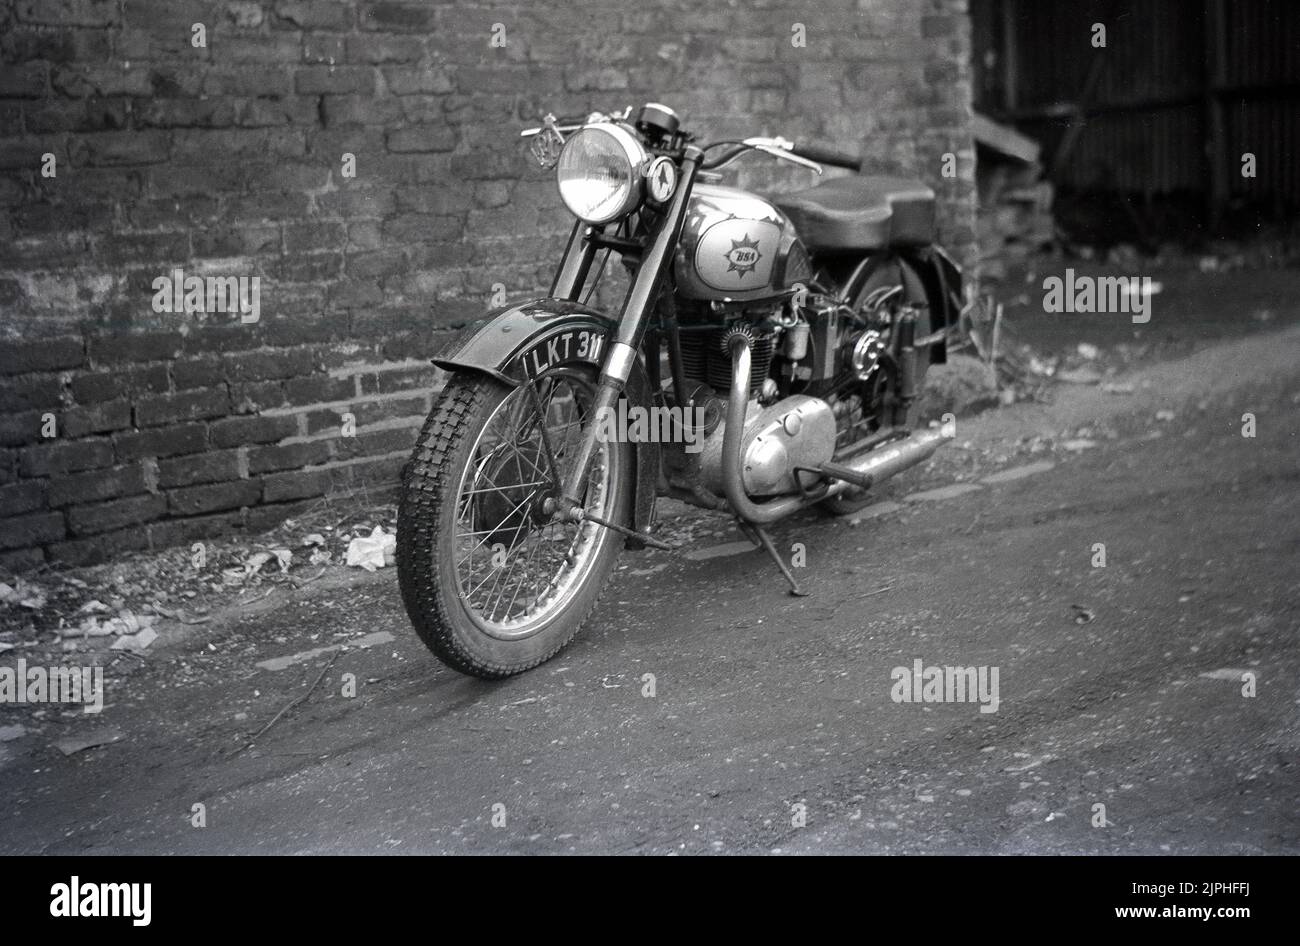 1950s, historical, a British made BSA motorcycle of the era parked on a dirt path outside an old brick warehouse, England, UK. Metal RAC badge on front fork. Founded in 1861 as the Birmingham Small Arms Company Ltd, for the production of firearms, a motorcycle division was established in 1903, and the first motorcycle released in 1910. In the 1950s, BSA Motorcycles was the largest motorcycle maker in the world. Stock Photo